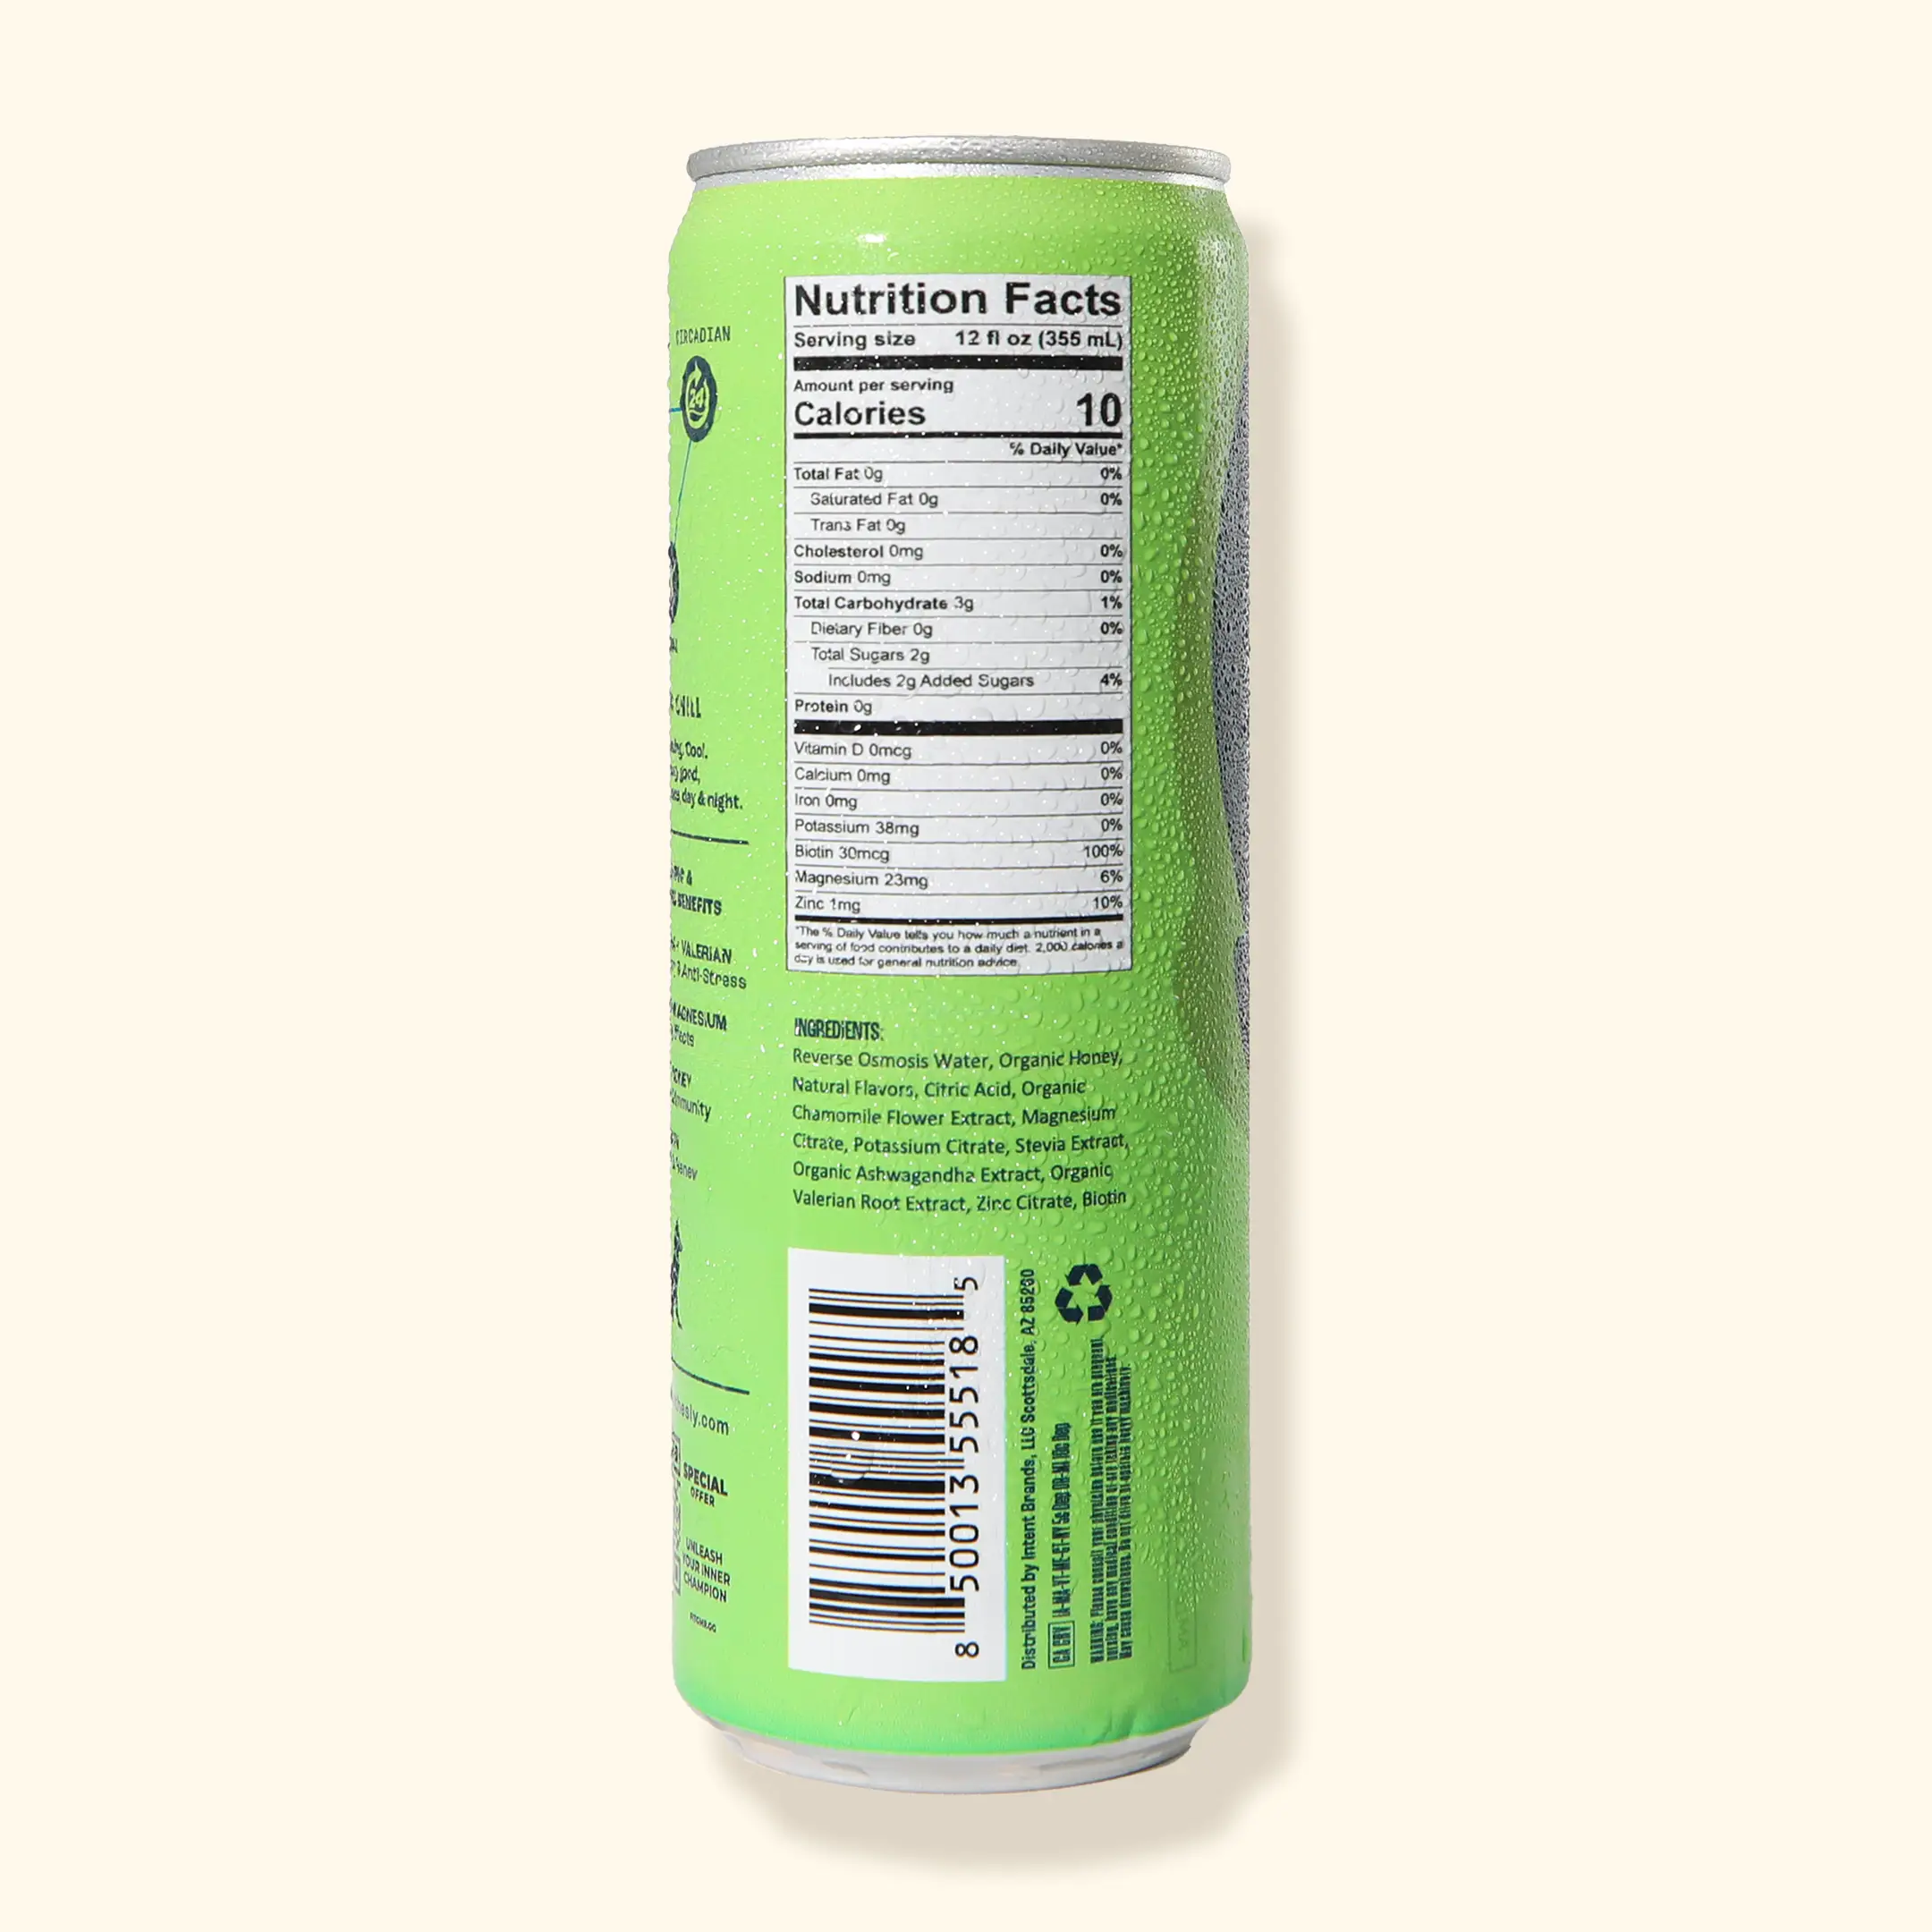 Sly™ CHILL Citrus - 12oz   Brain + Body Relaxation Drink